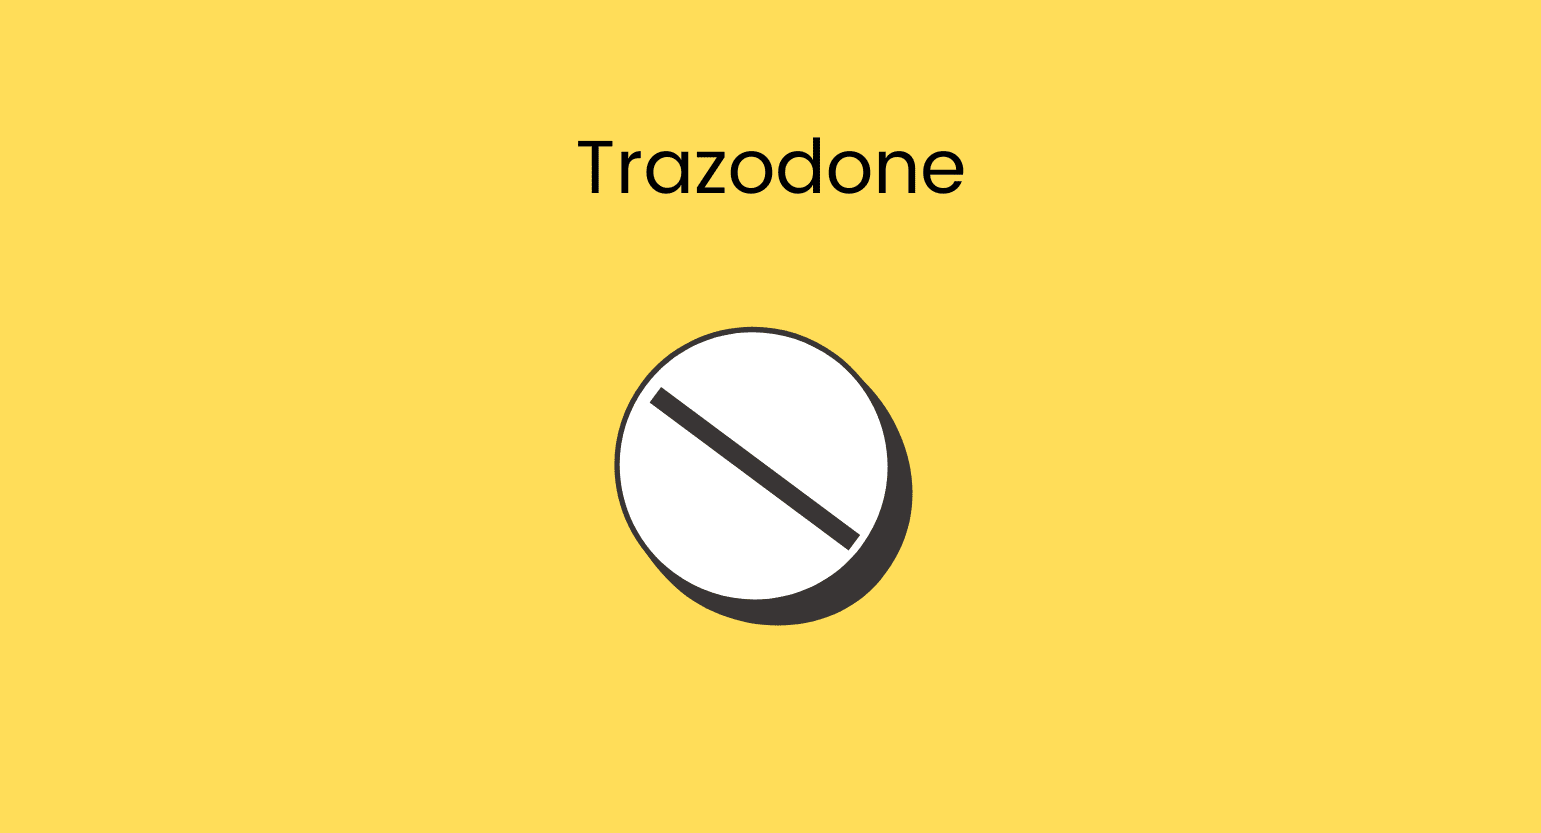 Kratom & Trazodone: Are They Safe to Use Together?